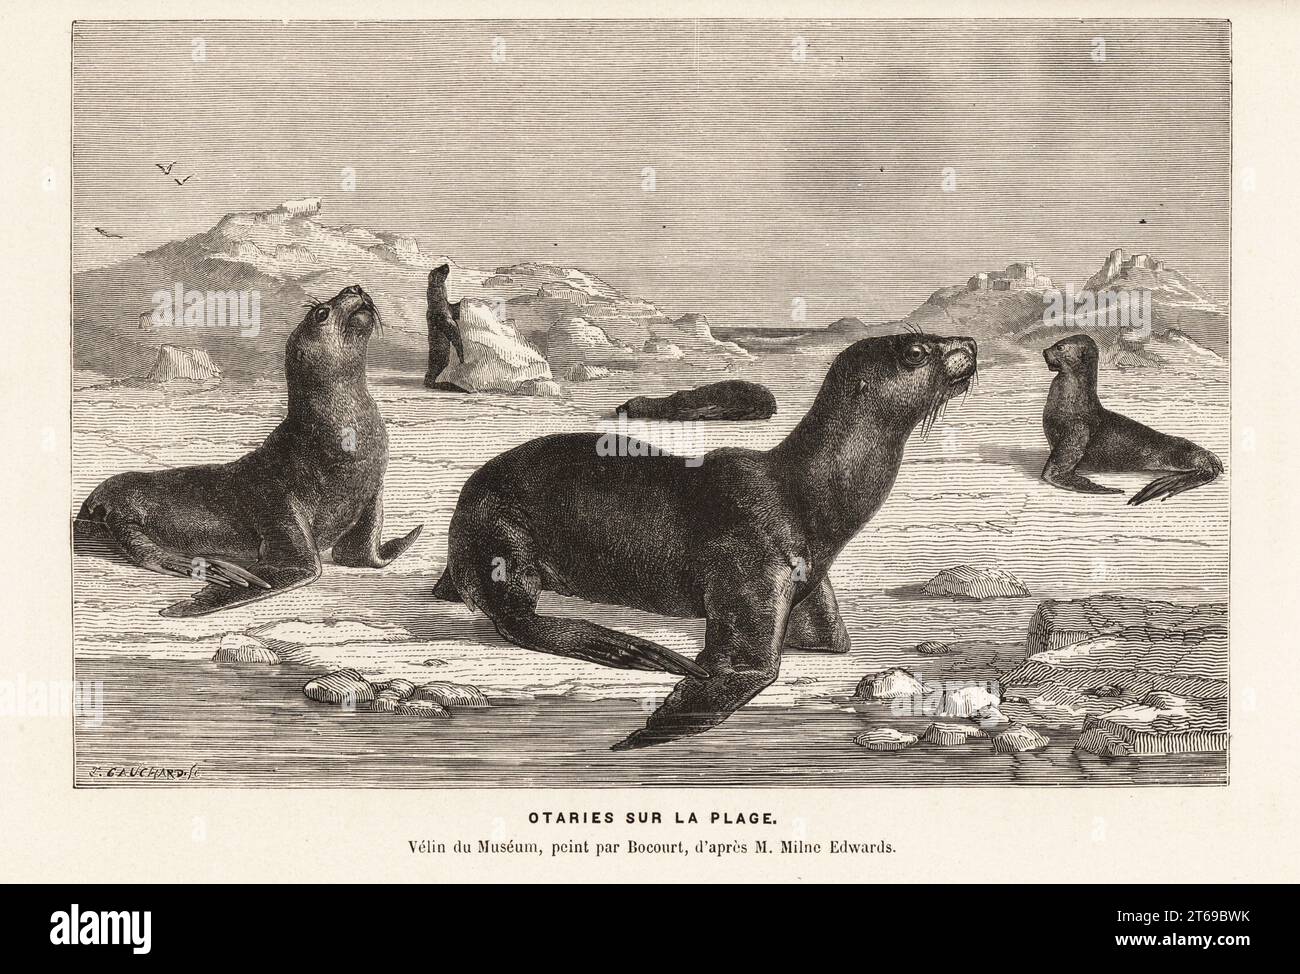 South American sea lions, Otaria flavescens, formerly Otaria byronia, basking on a beach. Otaries sur la plage. Velin du museum, peint par Bocourt, d'apres Milne-Edwards. Woodcut by Marie Firmin Bocourt after Henri Milne-Edwards from Alfred Fredols Le Monde de la Mer, the World of the Sea, edited by Olivier Fredol, Librairie Hachette et. Cie., Paris, 1881. Alfred Fredol was the pseudonym of French zoologist and botanist Alfred Moquin-Tandon, 1804-1863. Stock Photo